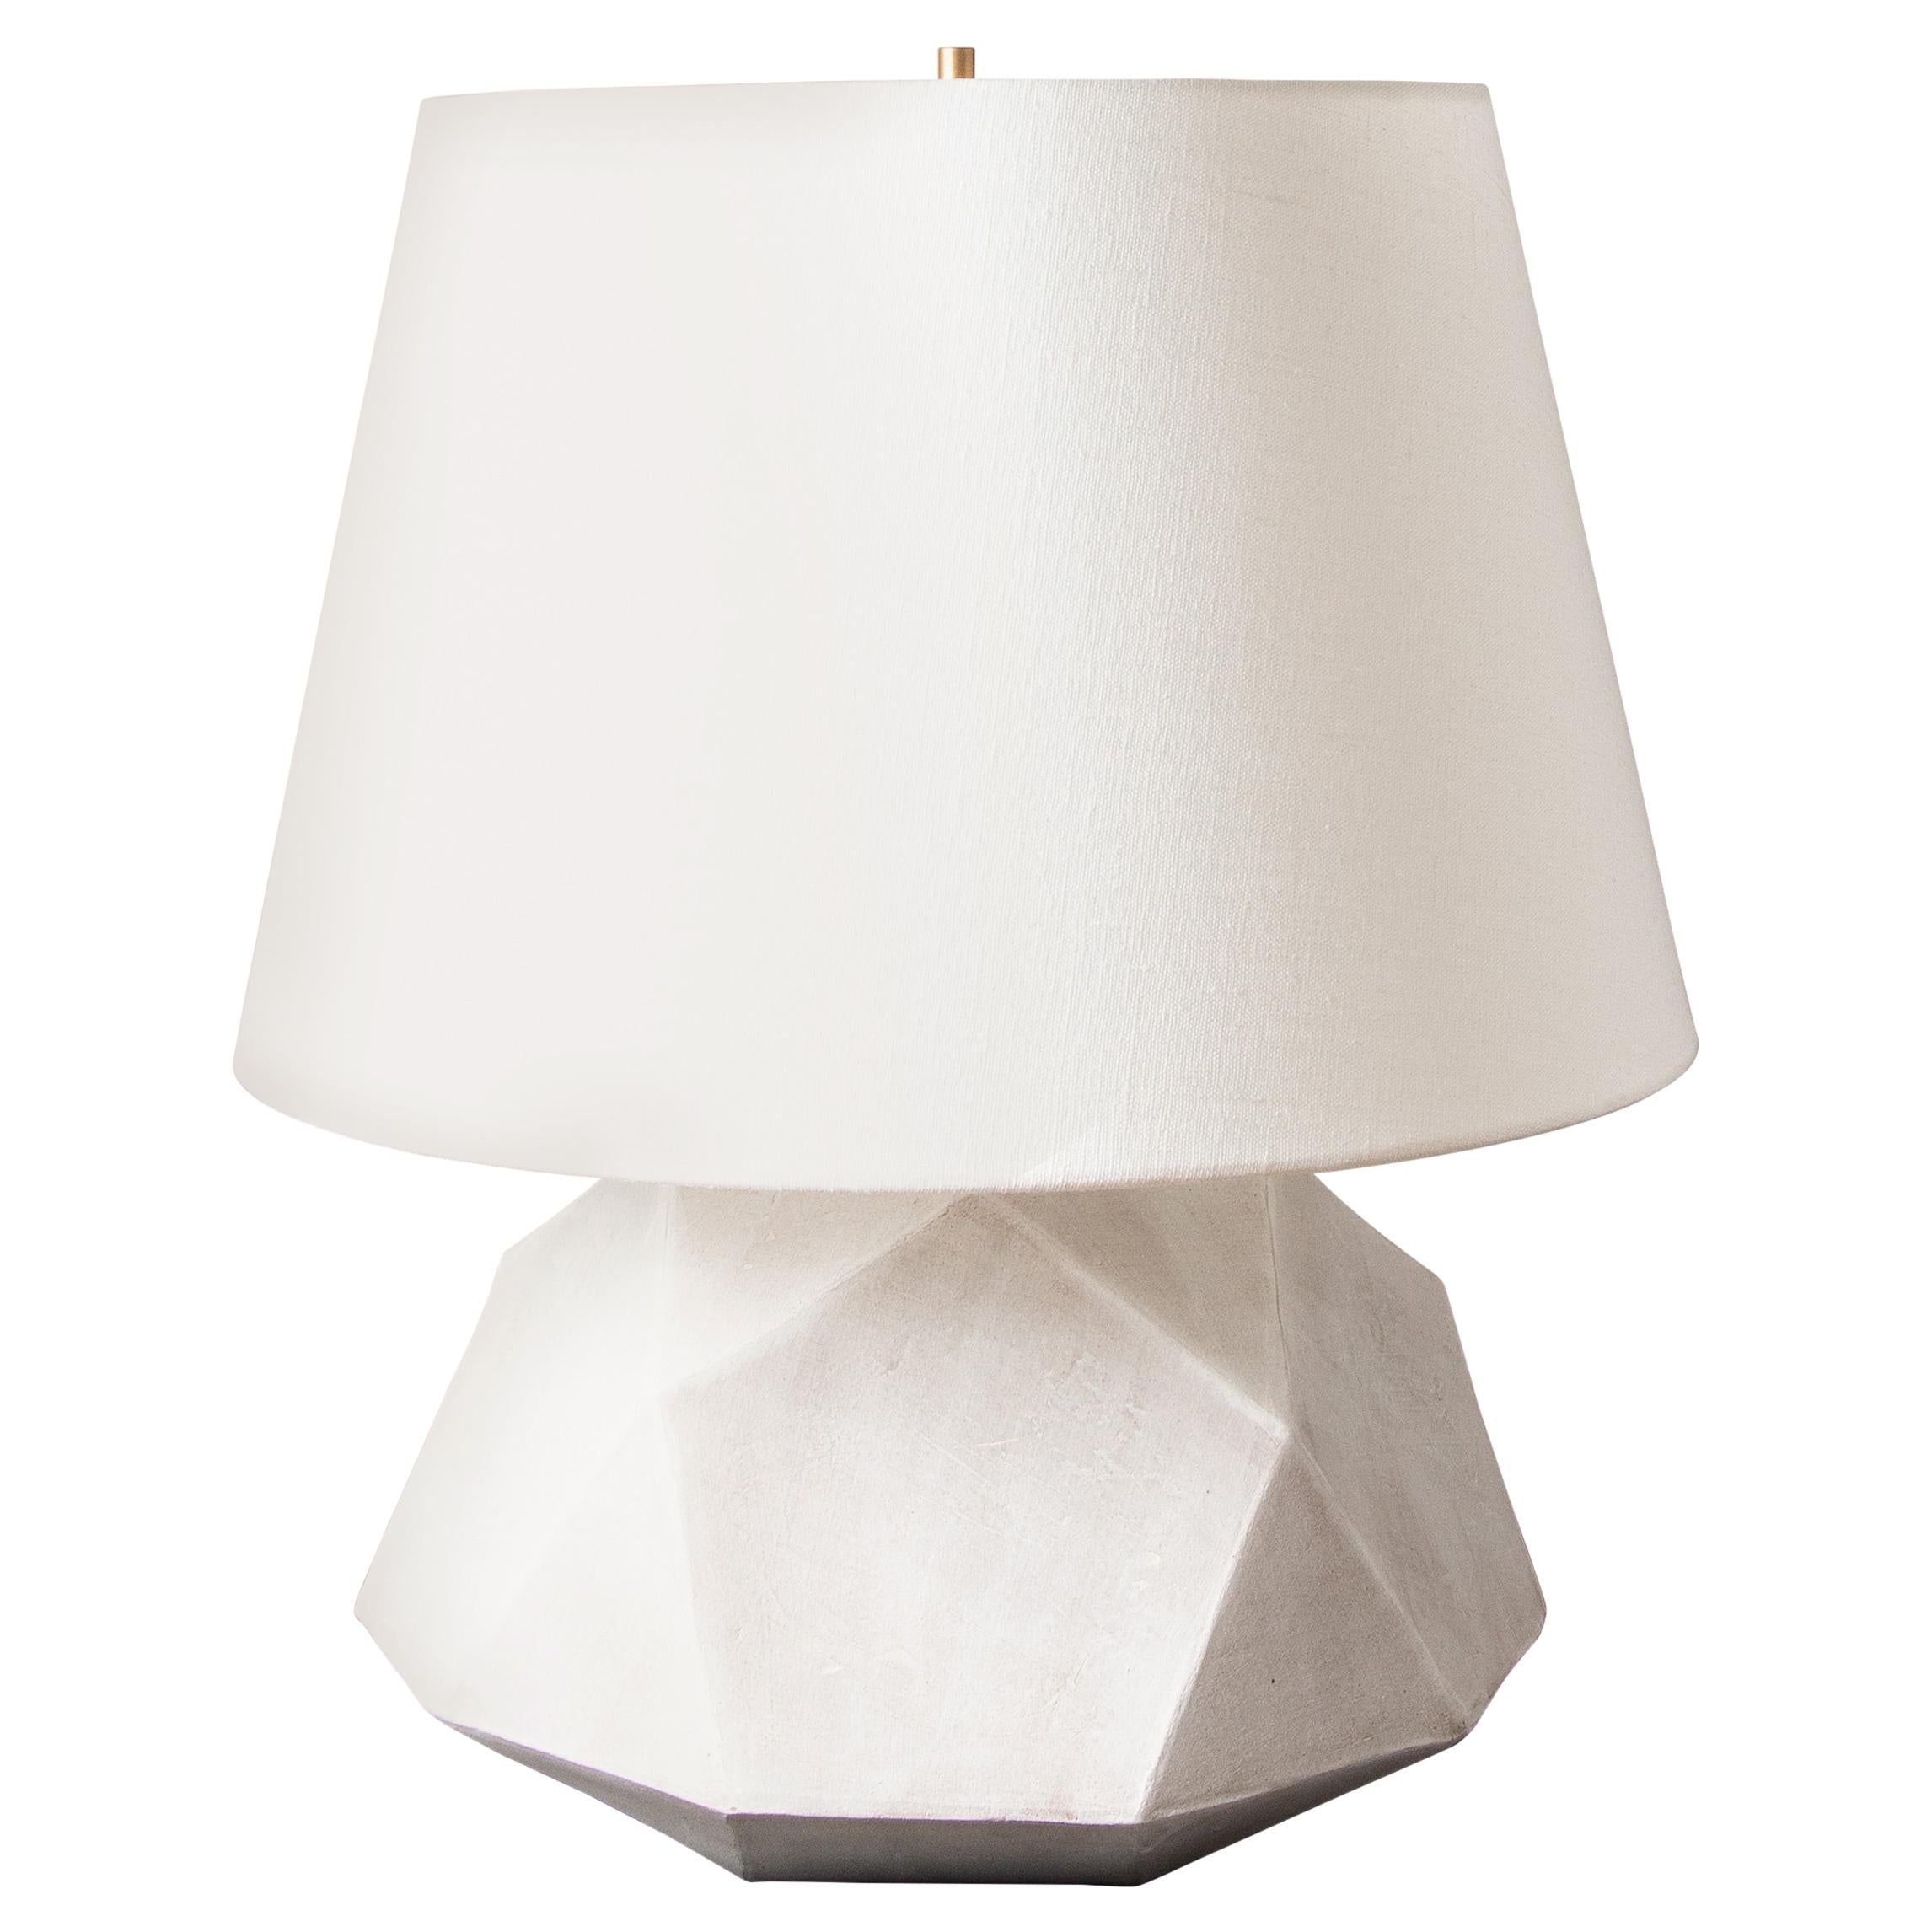 Geode Lamp 1 - Geometric White Ceramic and Brass Table Lamp #1 For Sale